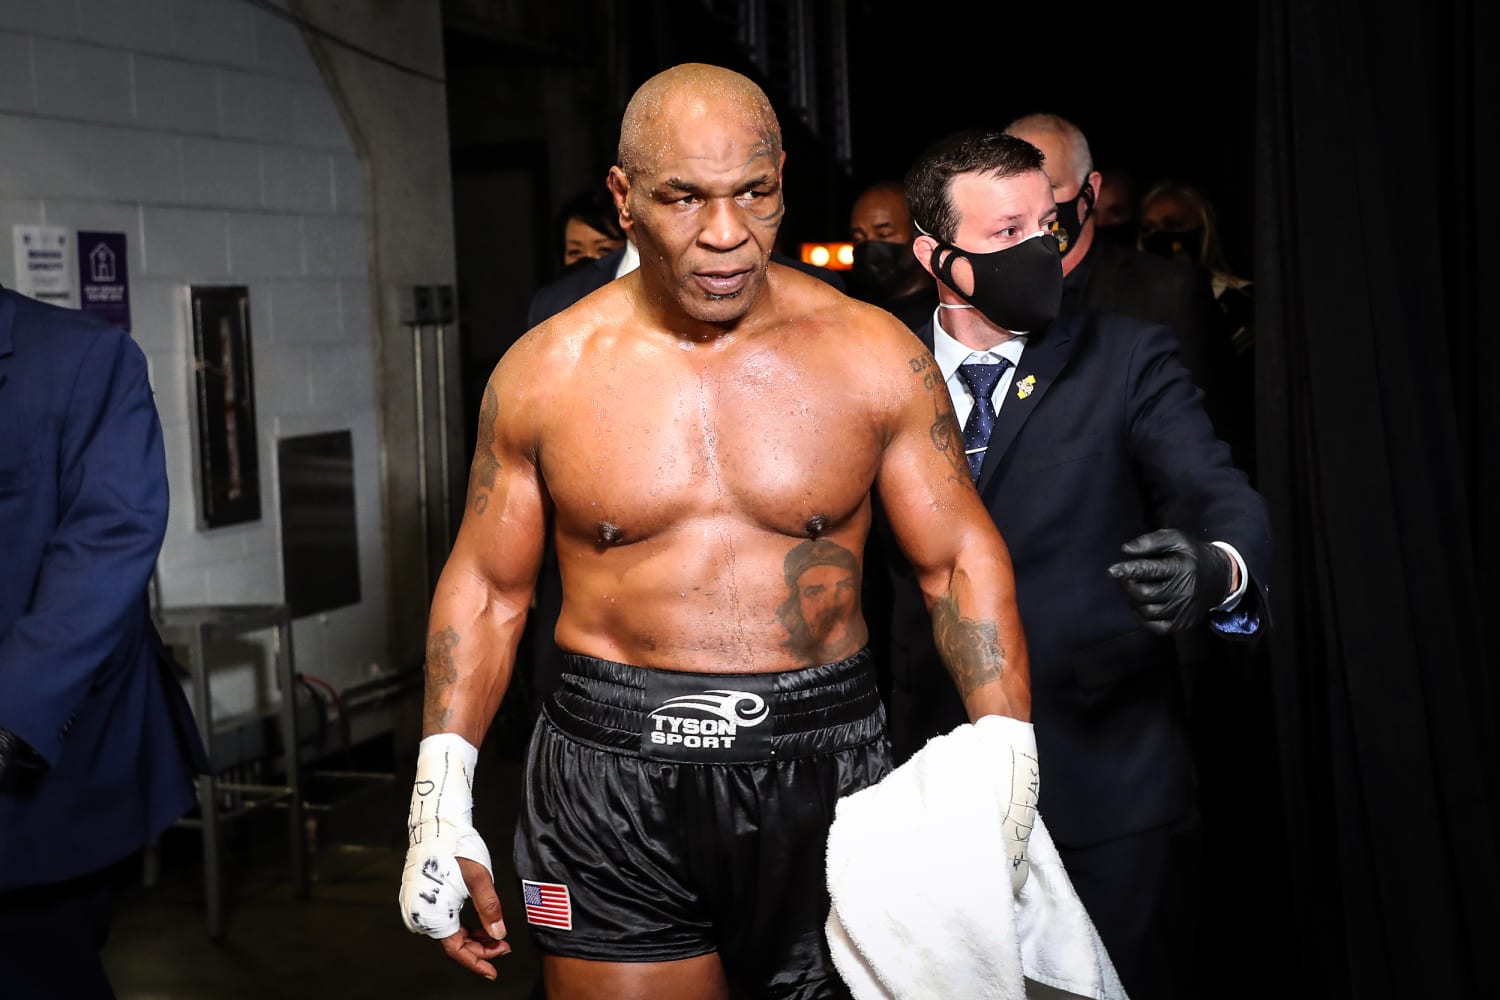 Mike Tyson criticizes Hulu over series portraying his life